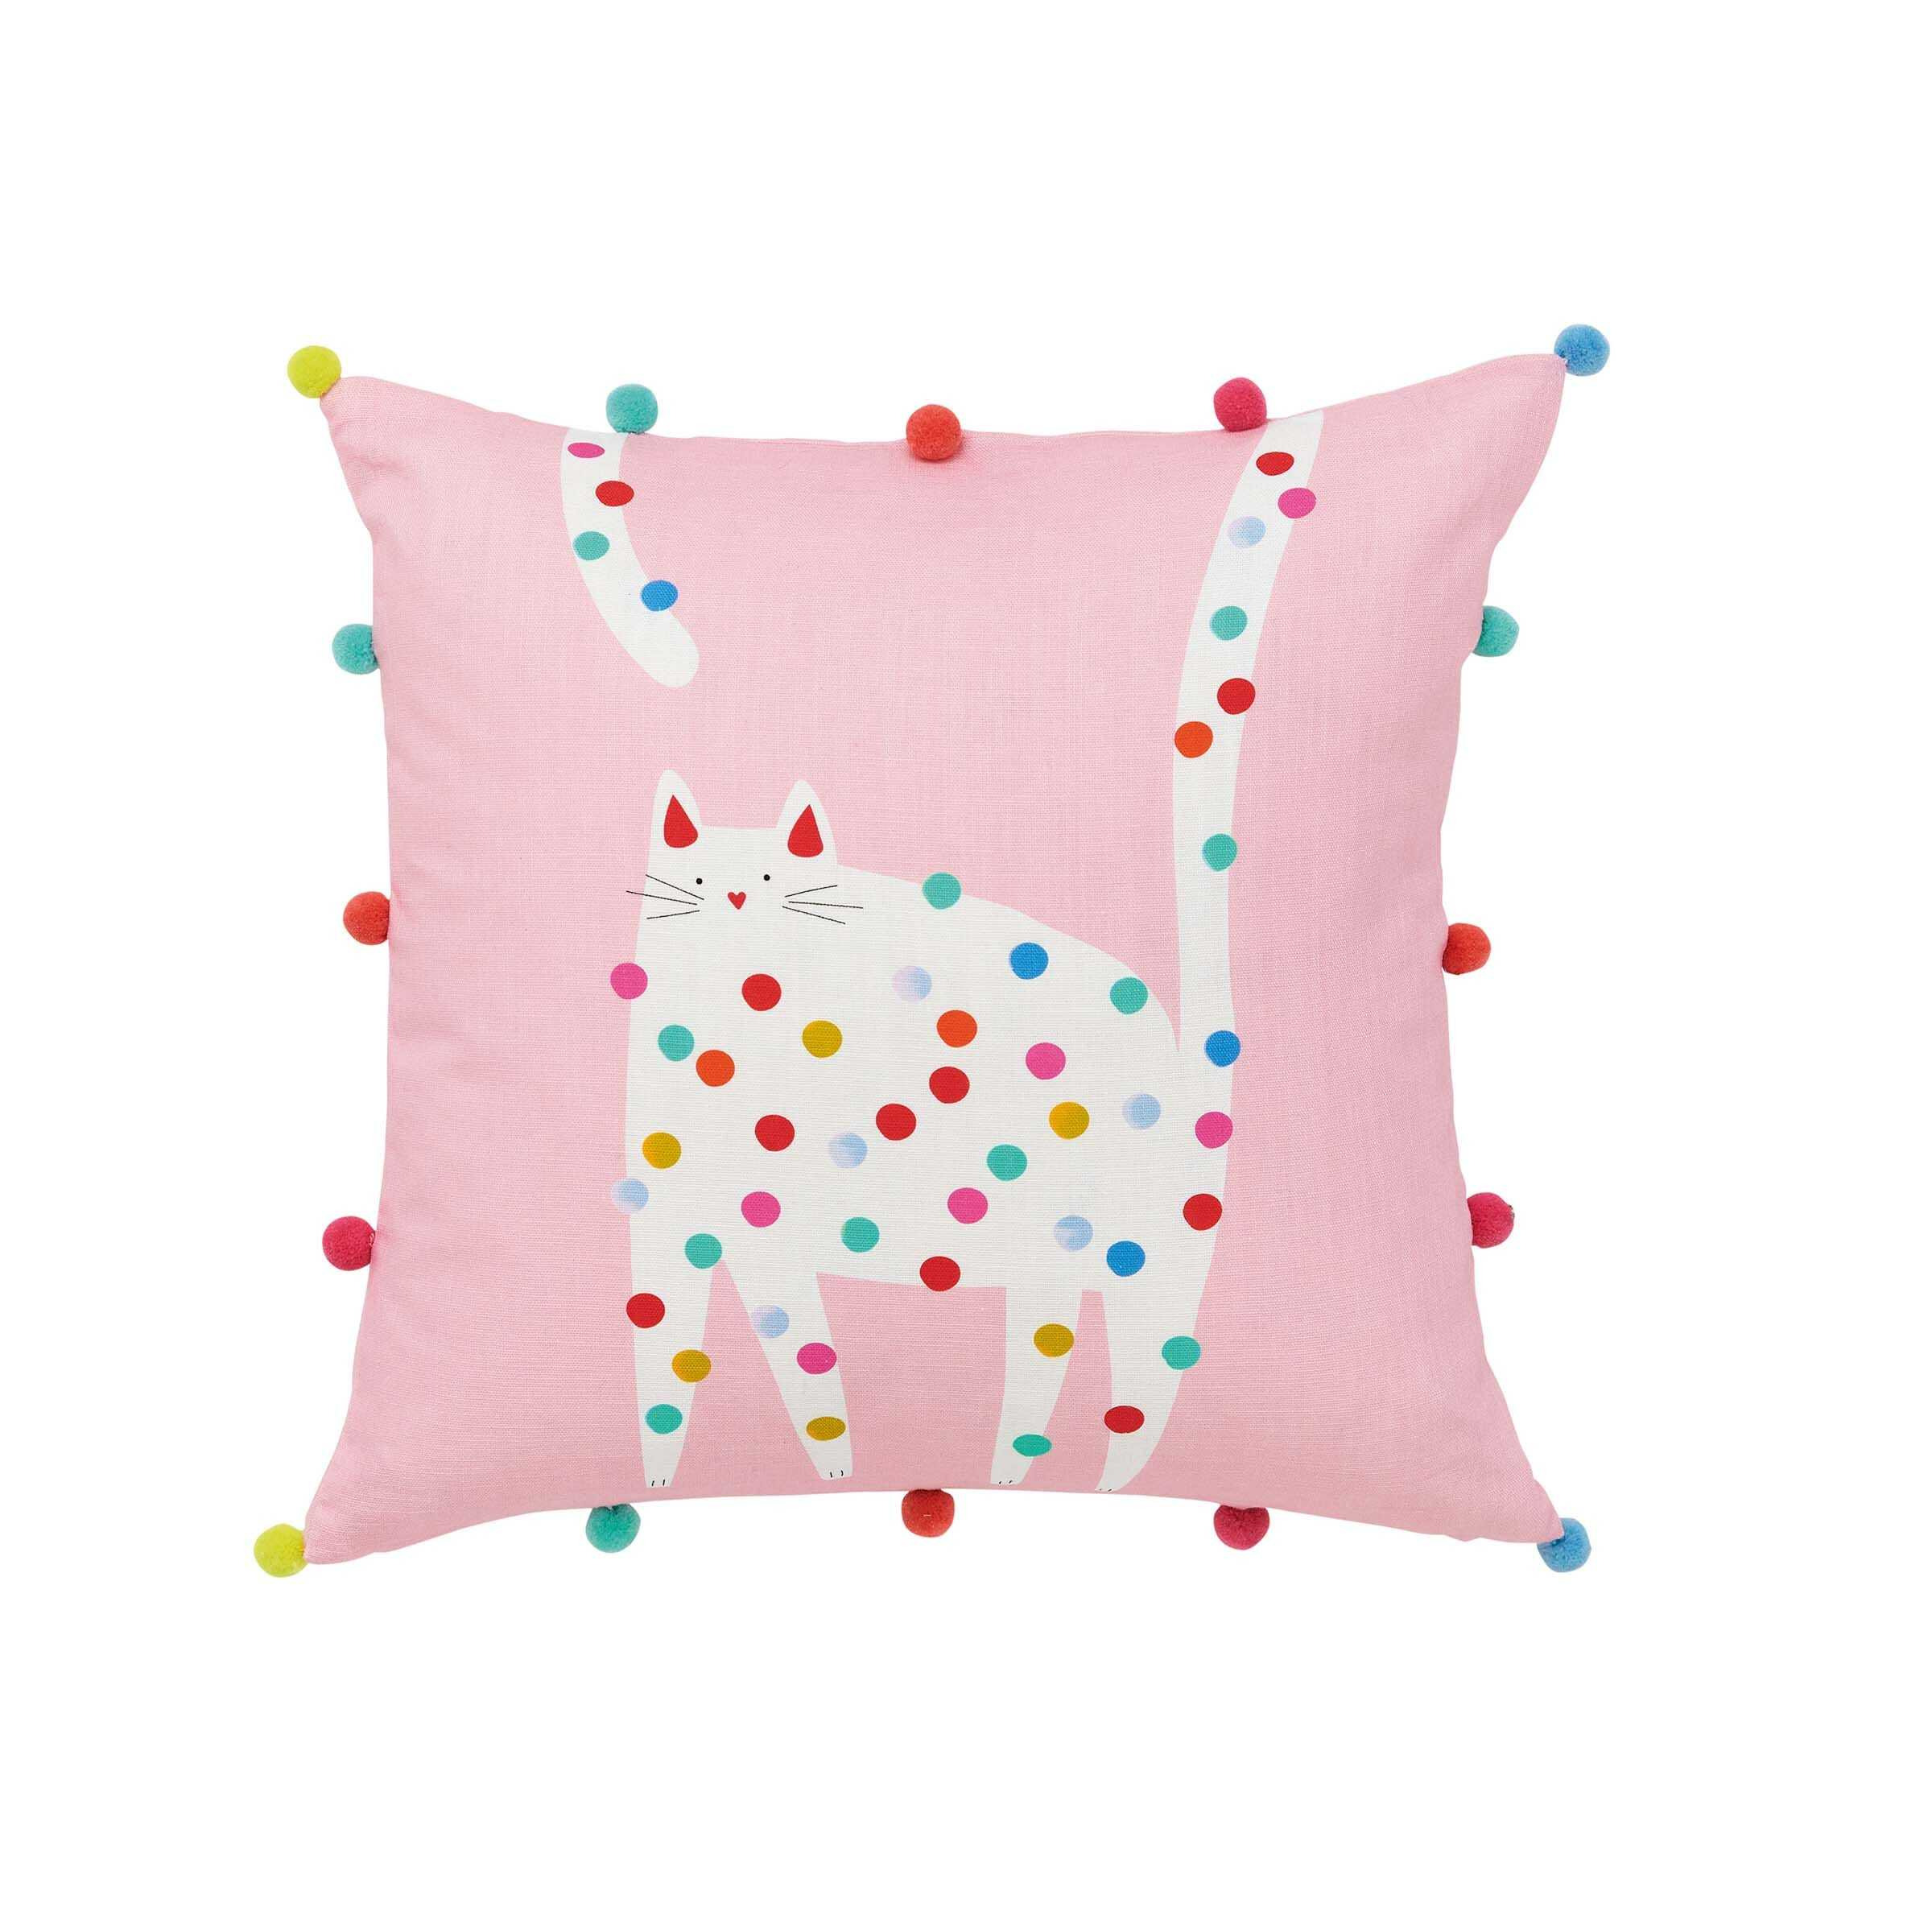 Joules Bakewell Floral Cushion 45cm x 45cm, Multi - image 1